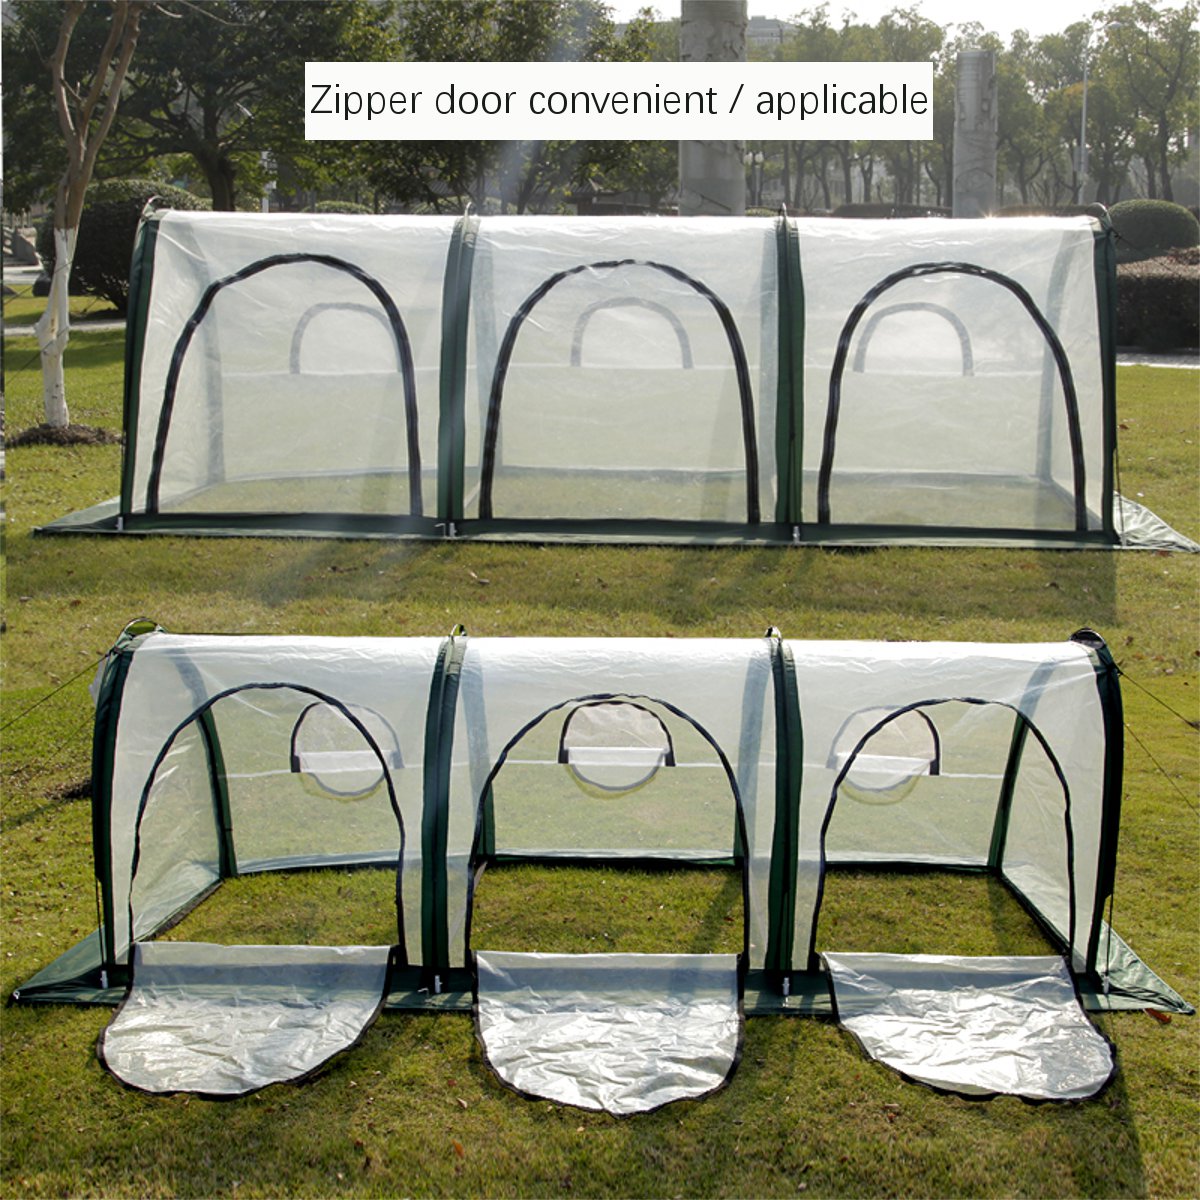 200x100x100cm-PVC-Garden-Greenhouse-Cover-Waterproof-Protects-Plants-Flowers-Planting-Heat-Proof-Col-1712540-5